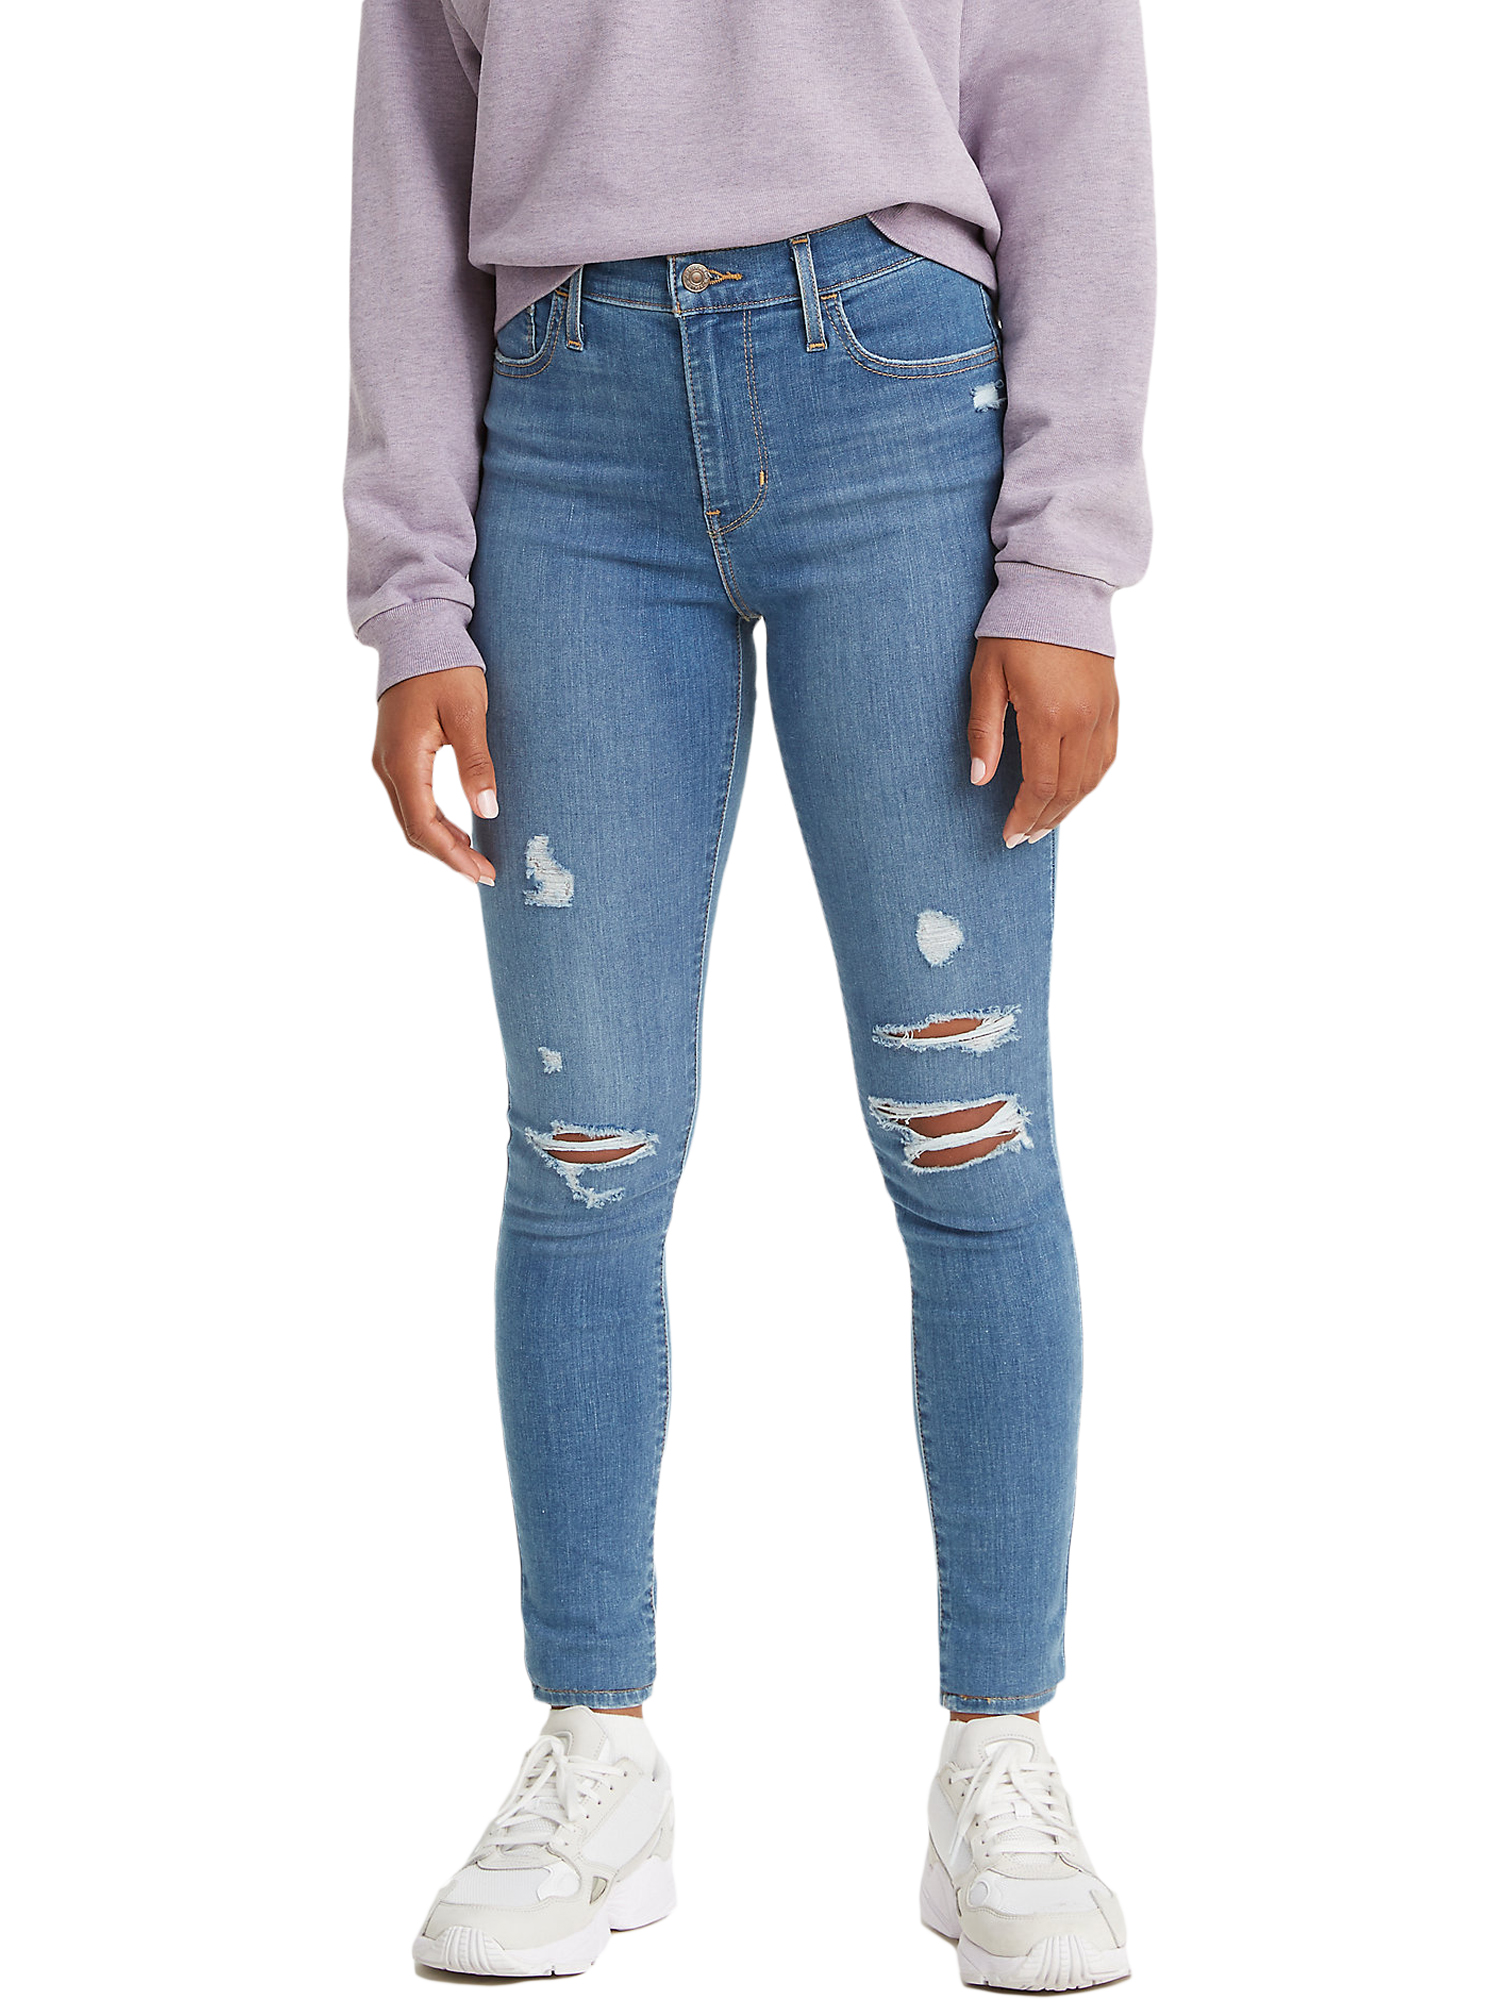 Levi's Original Red Tab 720 High-Rise Super Skinny Jeans - image 1 of 5